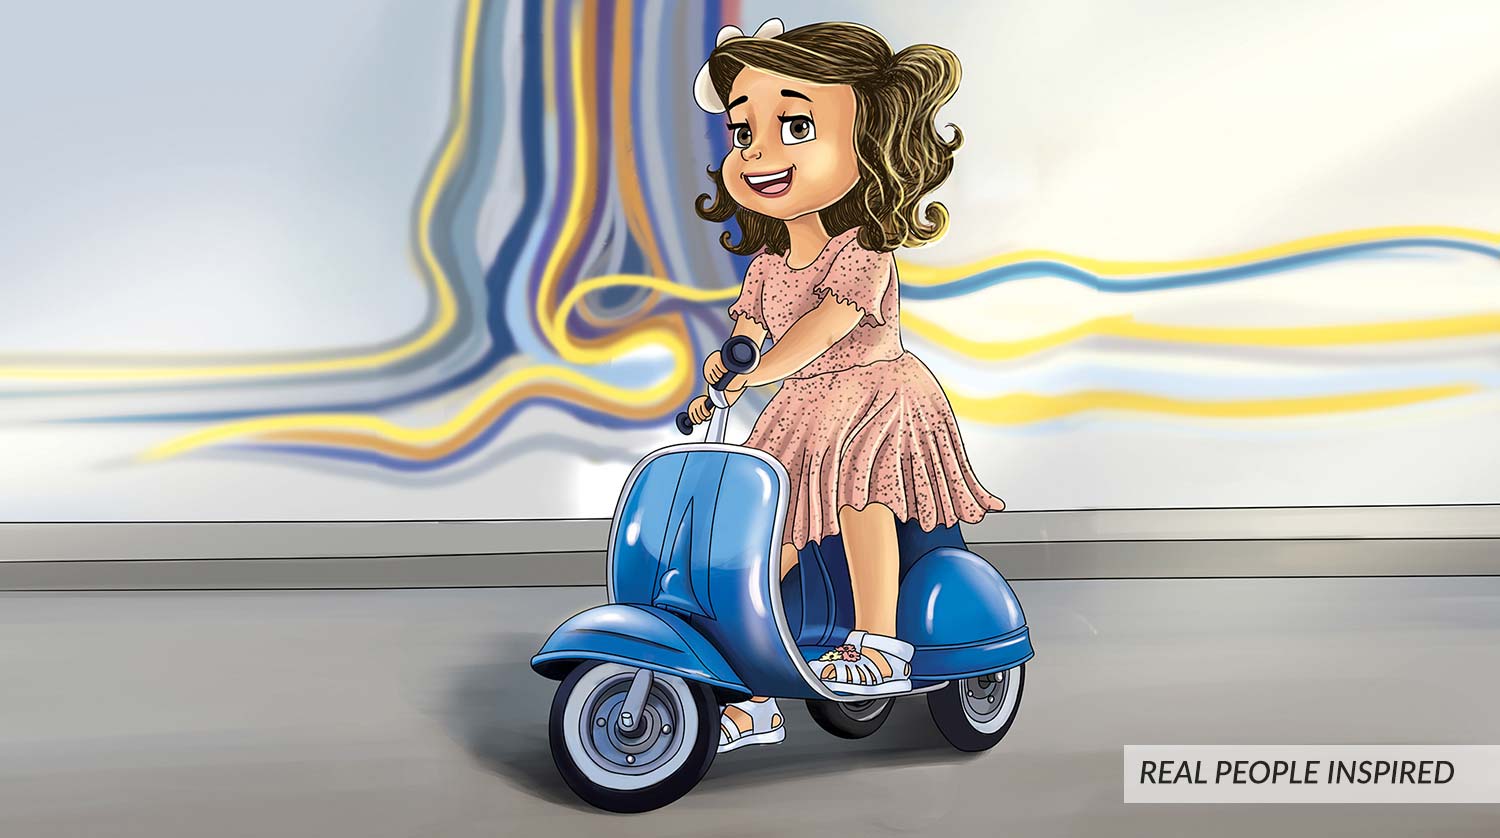 Digital painting of a little girl riding scotty/bike with abstract lines in background